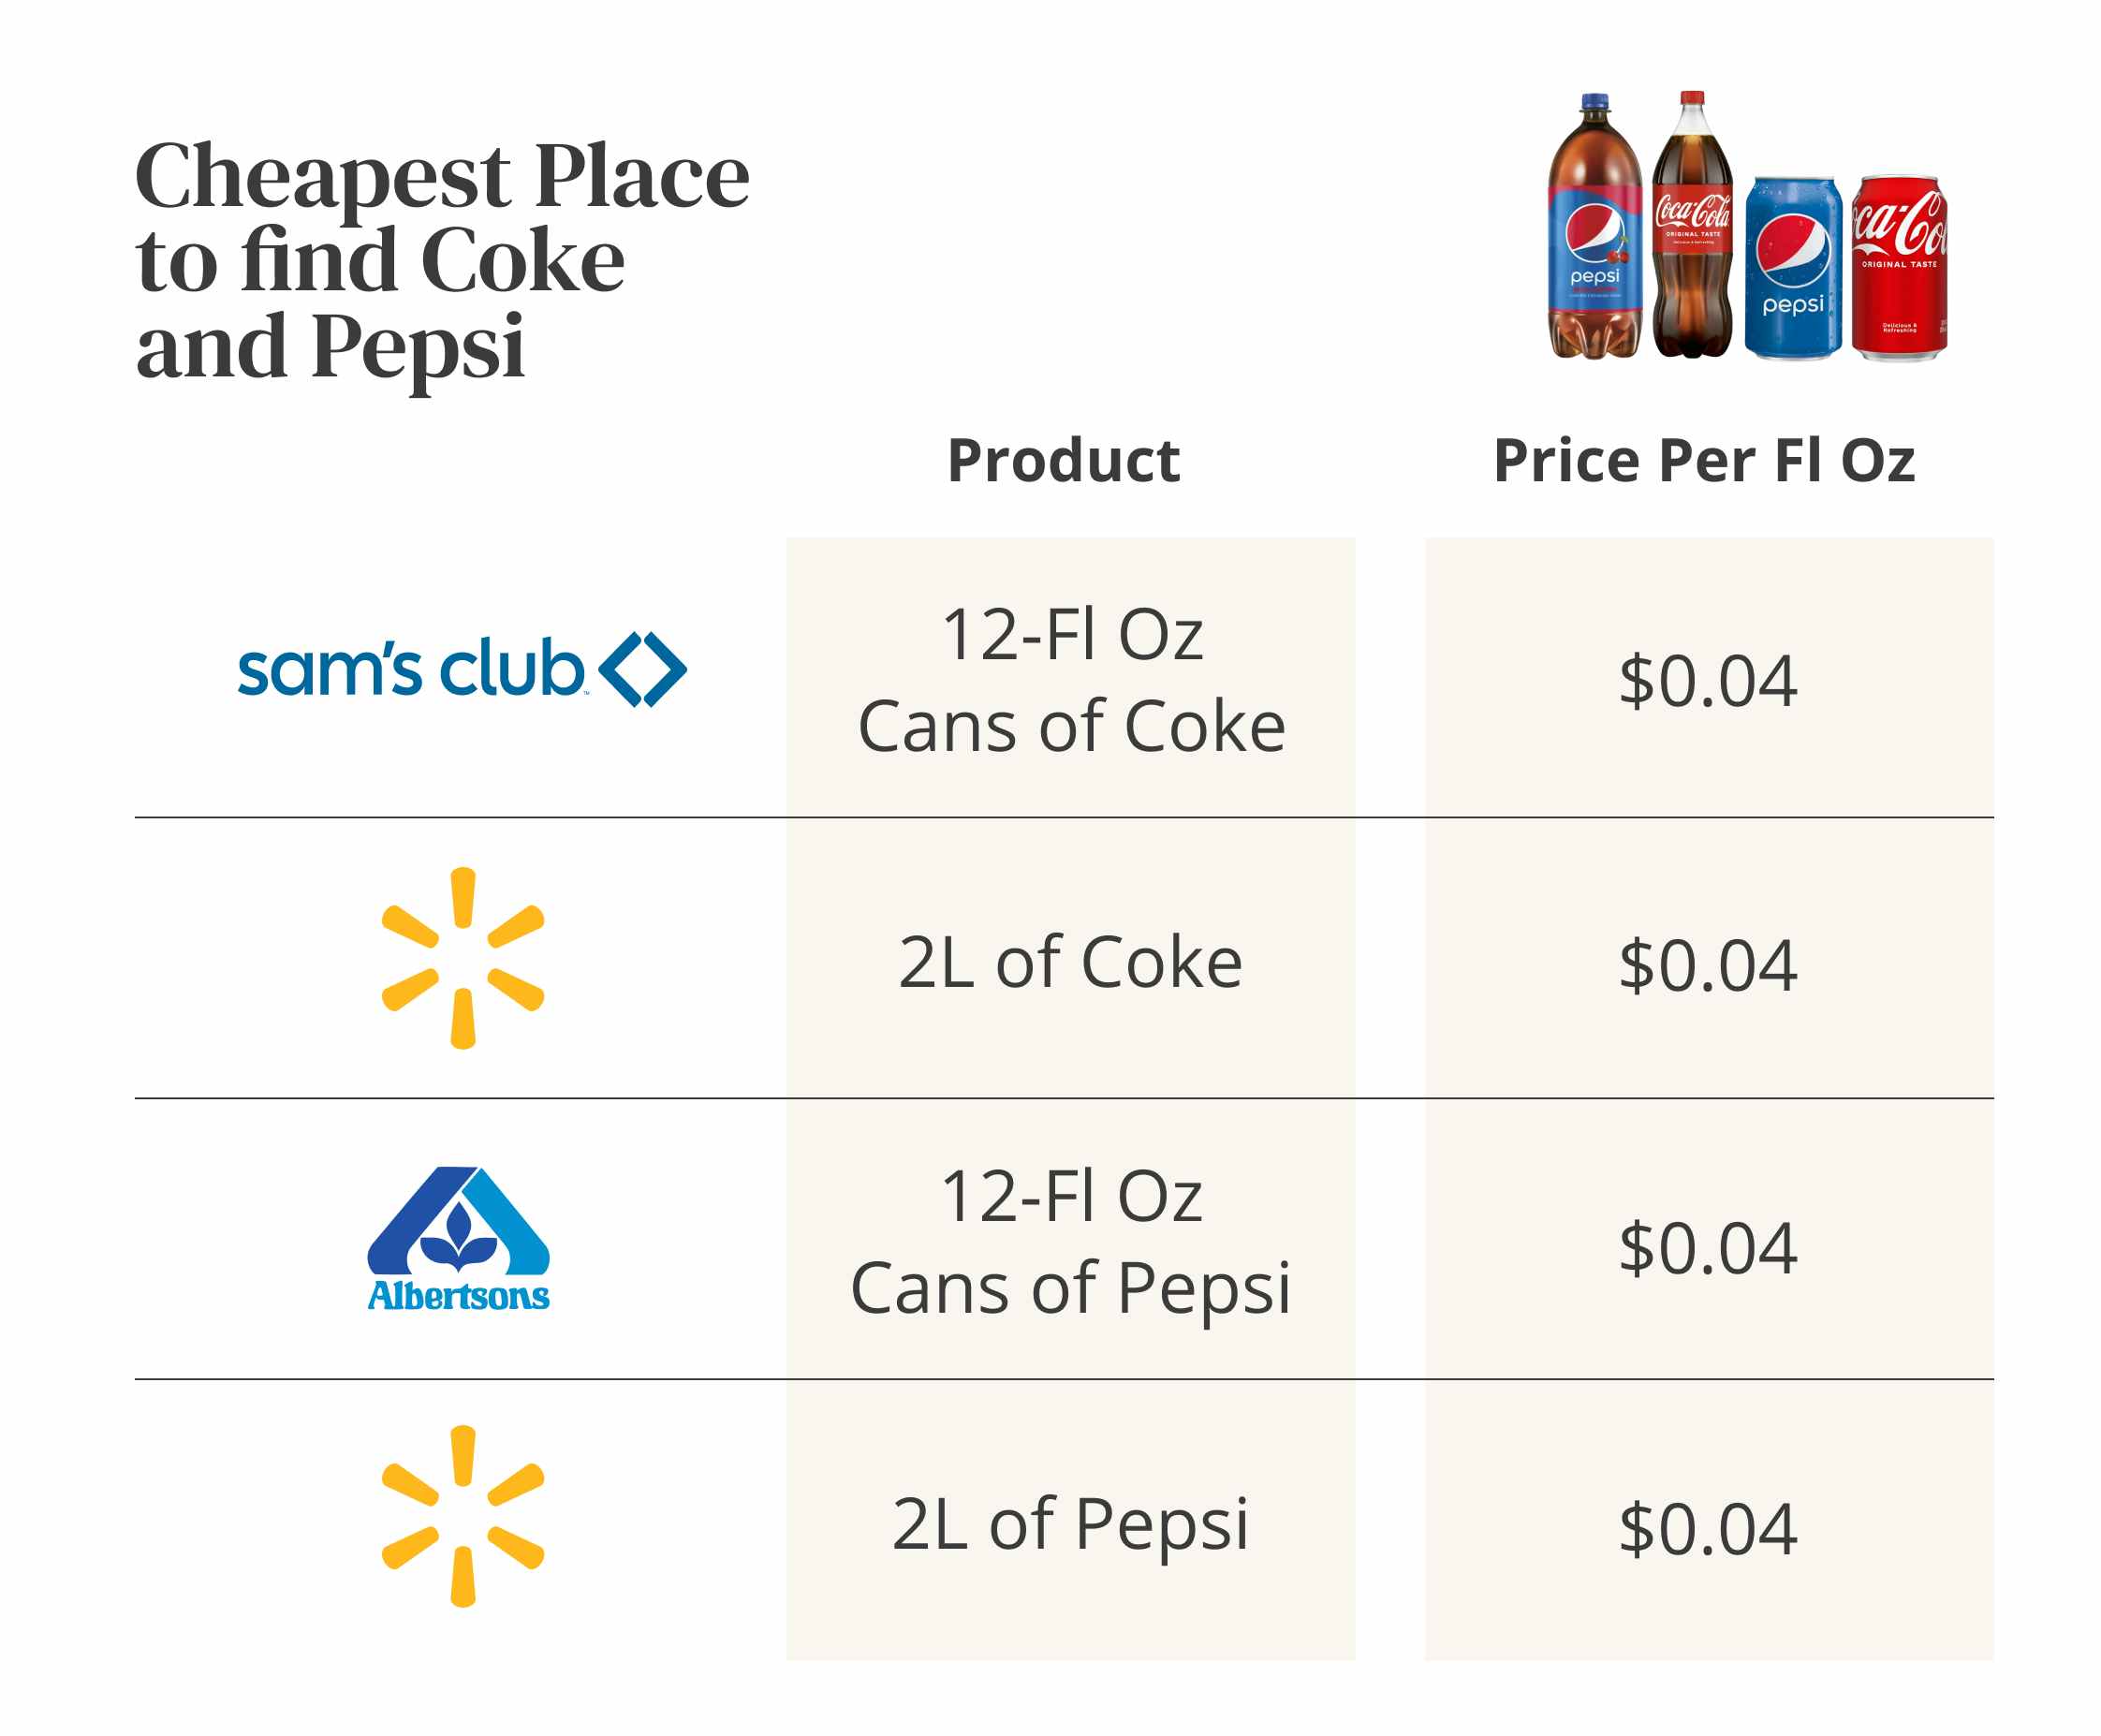 cheapest place to buy coke and pepsi